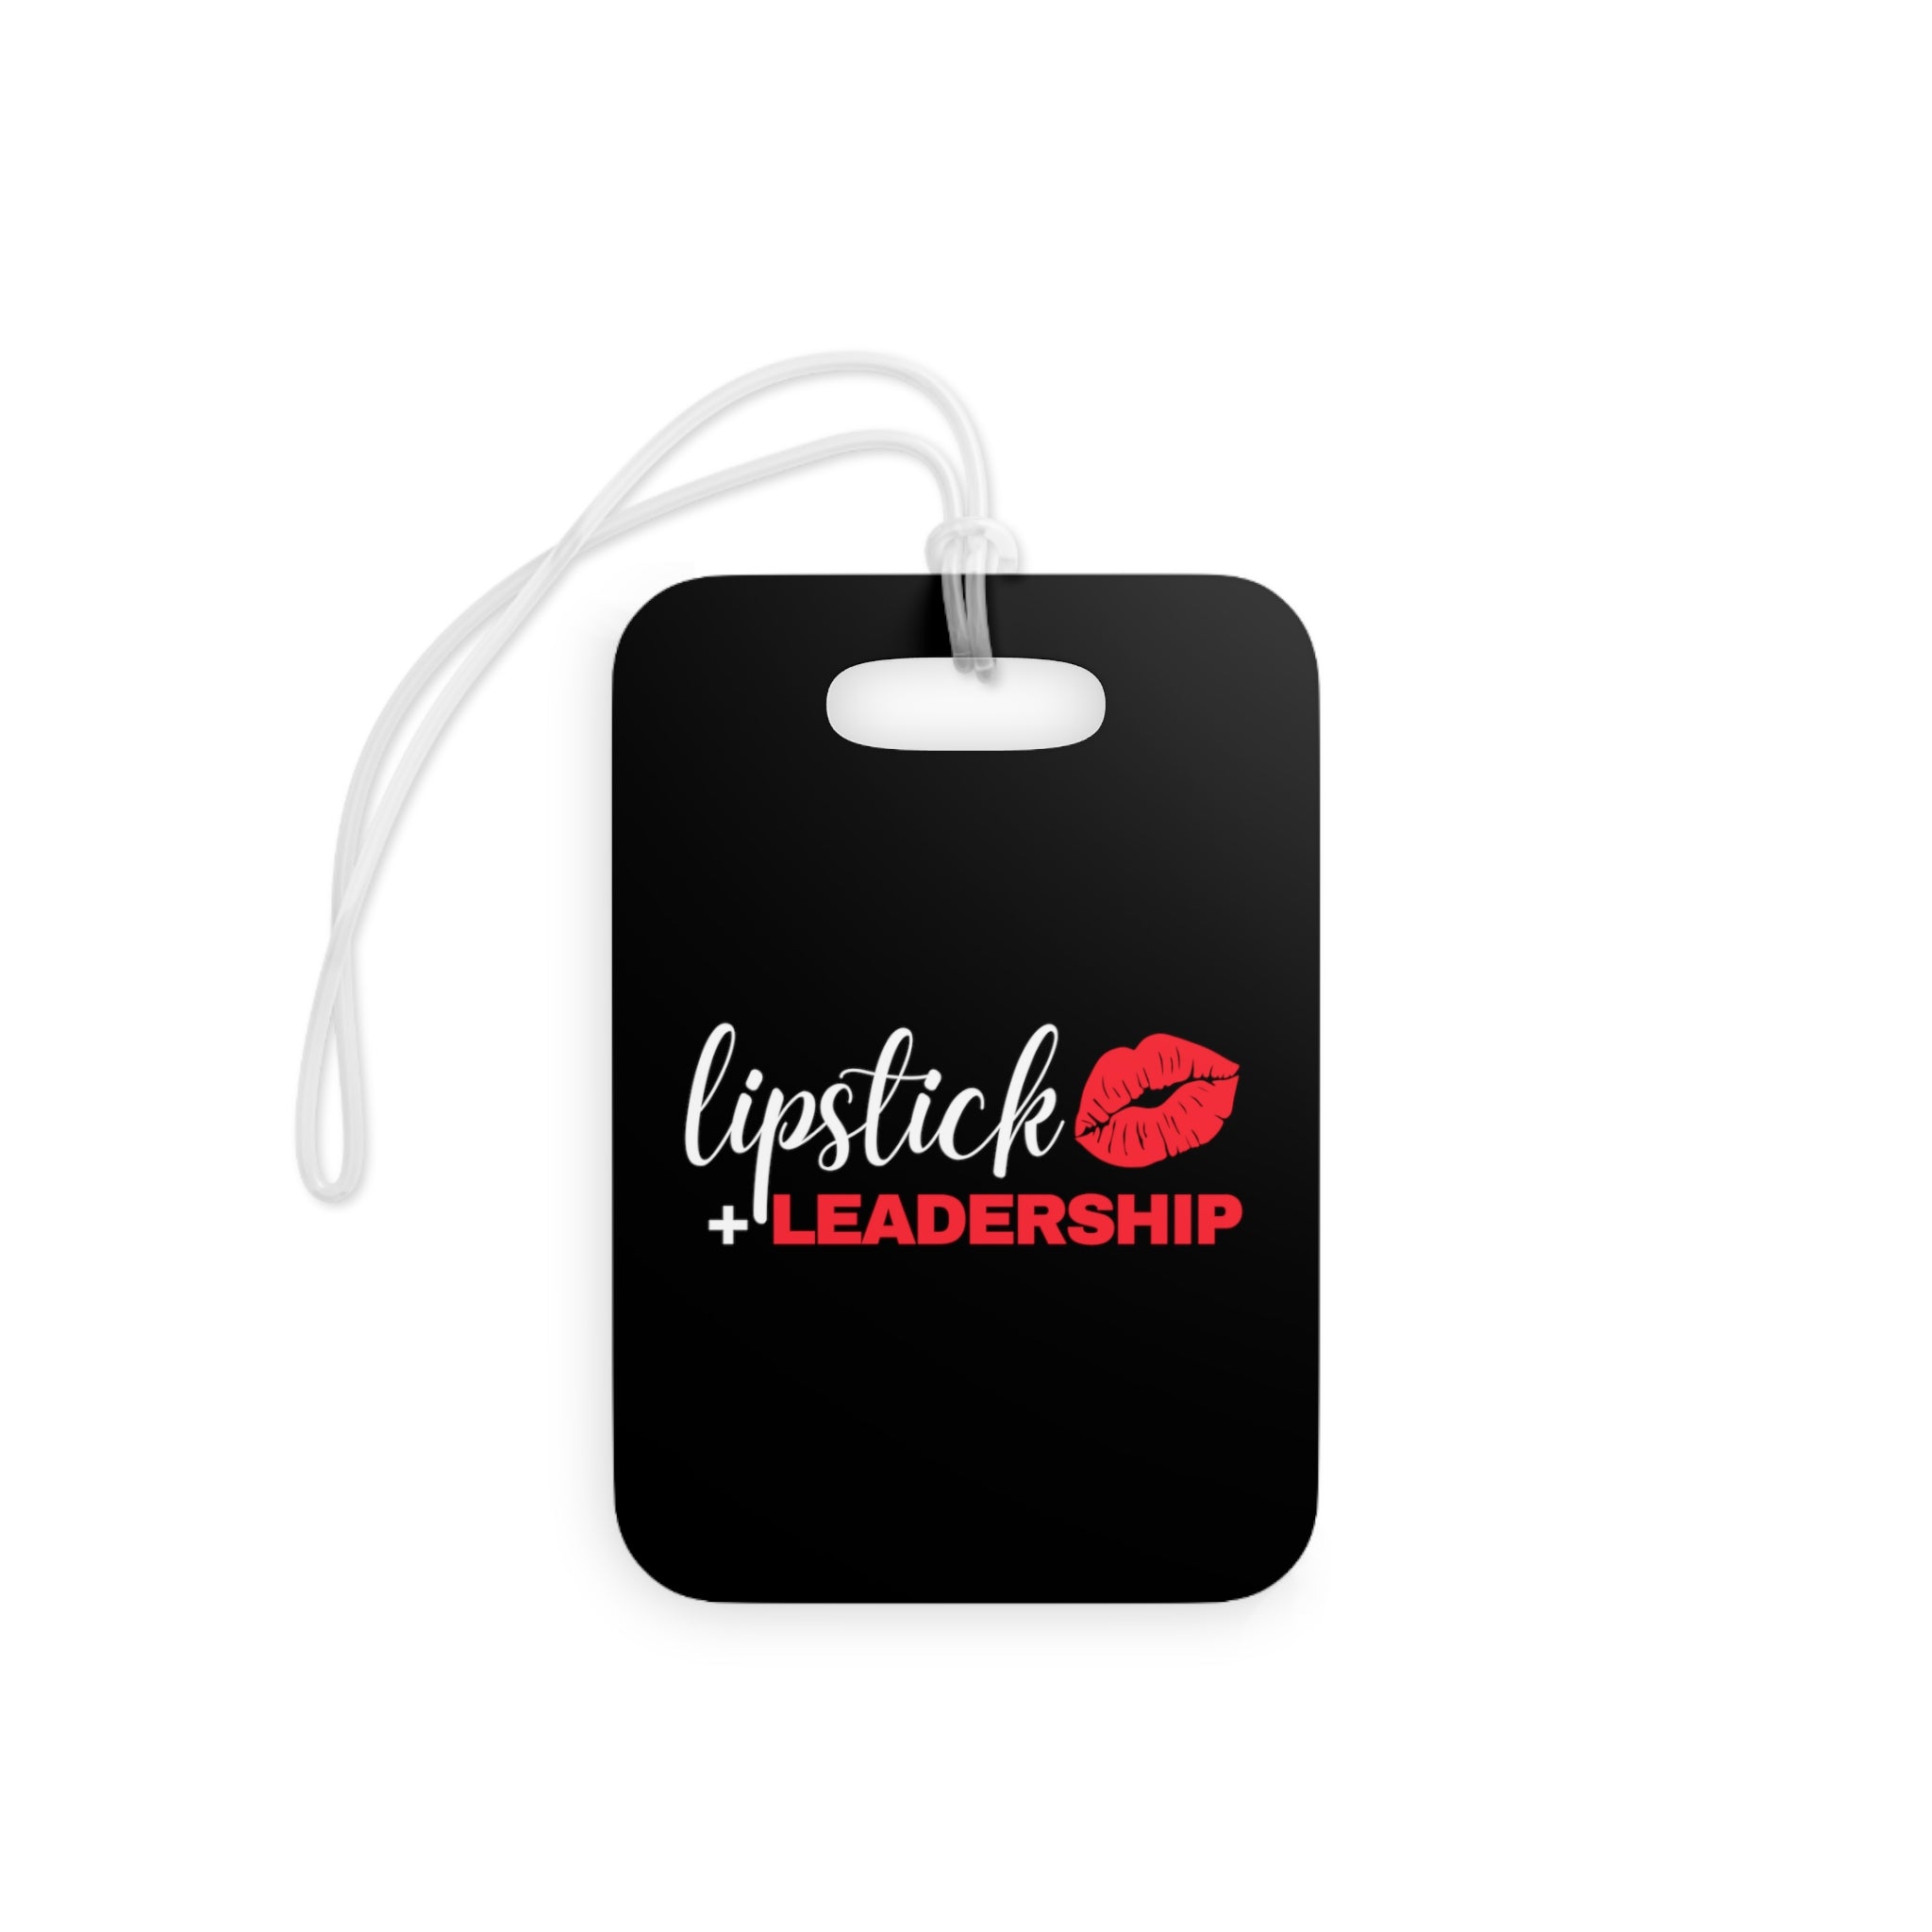 Lipstick + Leadership (Red Lips) Bag Tag, Makeup Lover Gift, Boss Babe Travel Tag Accessories Rectangle-One-size The Middle Aged Groove